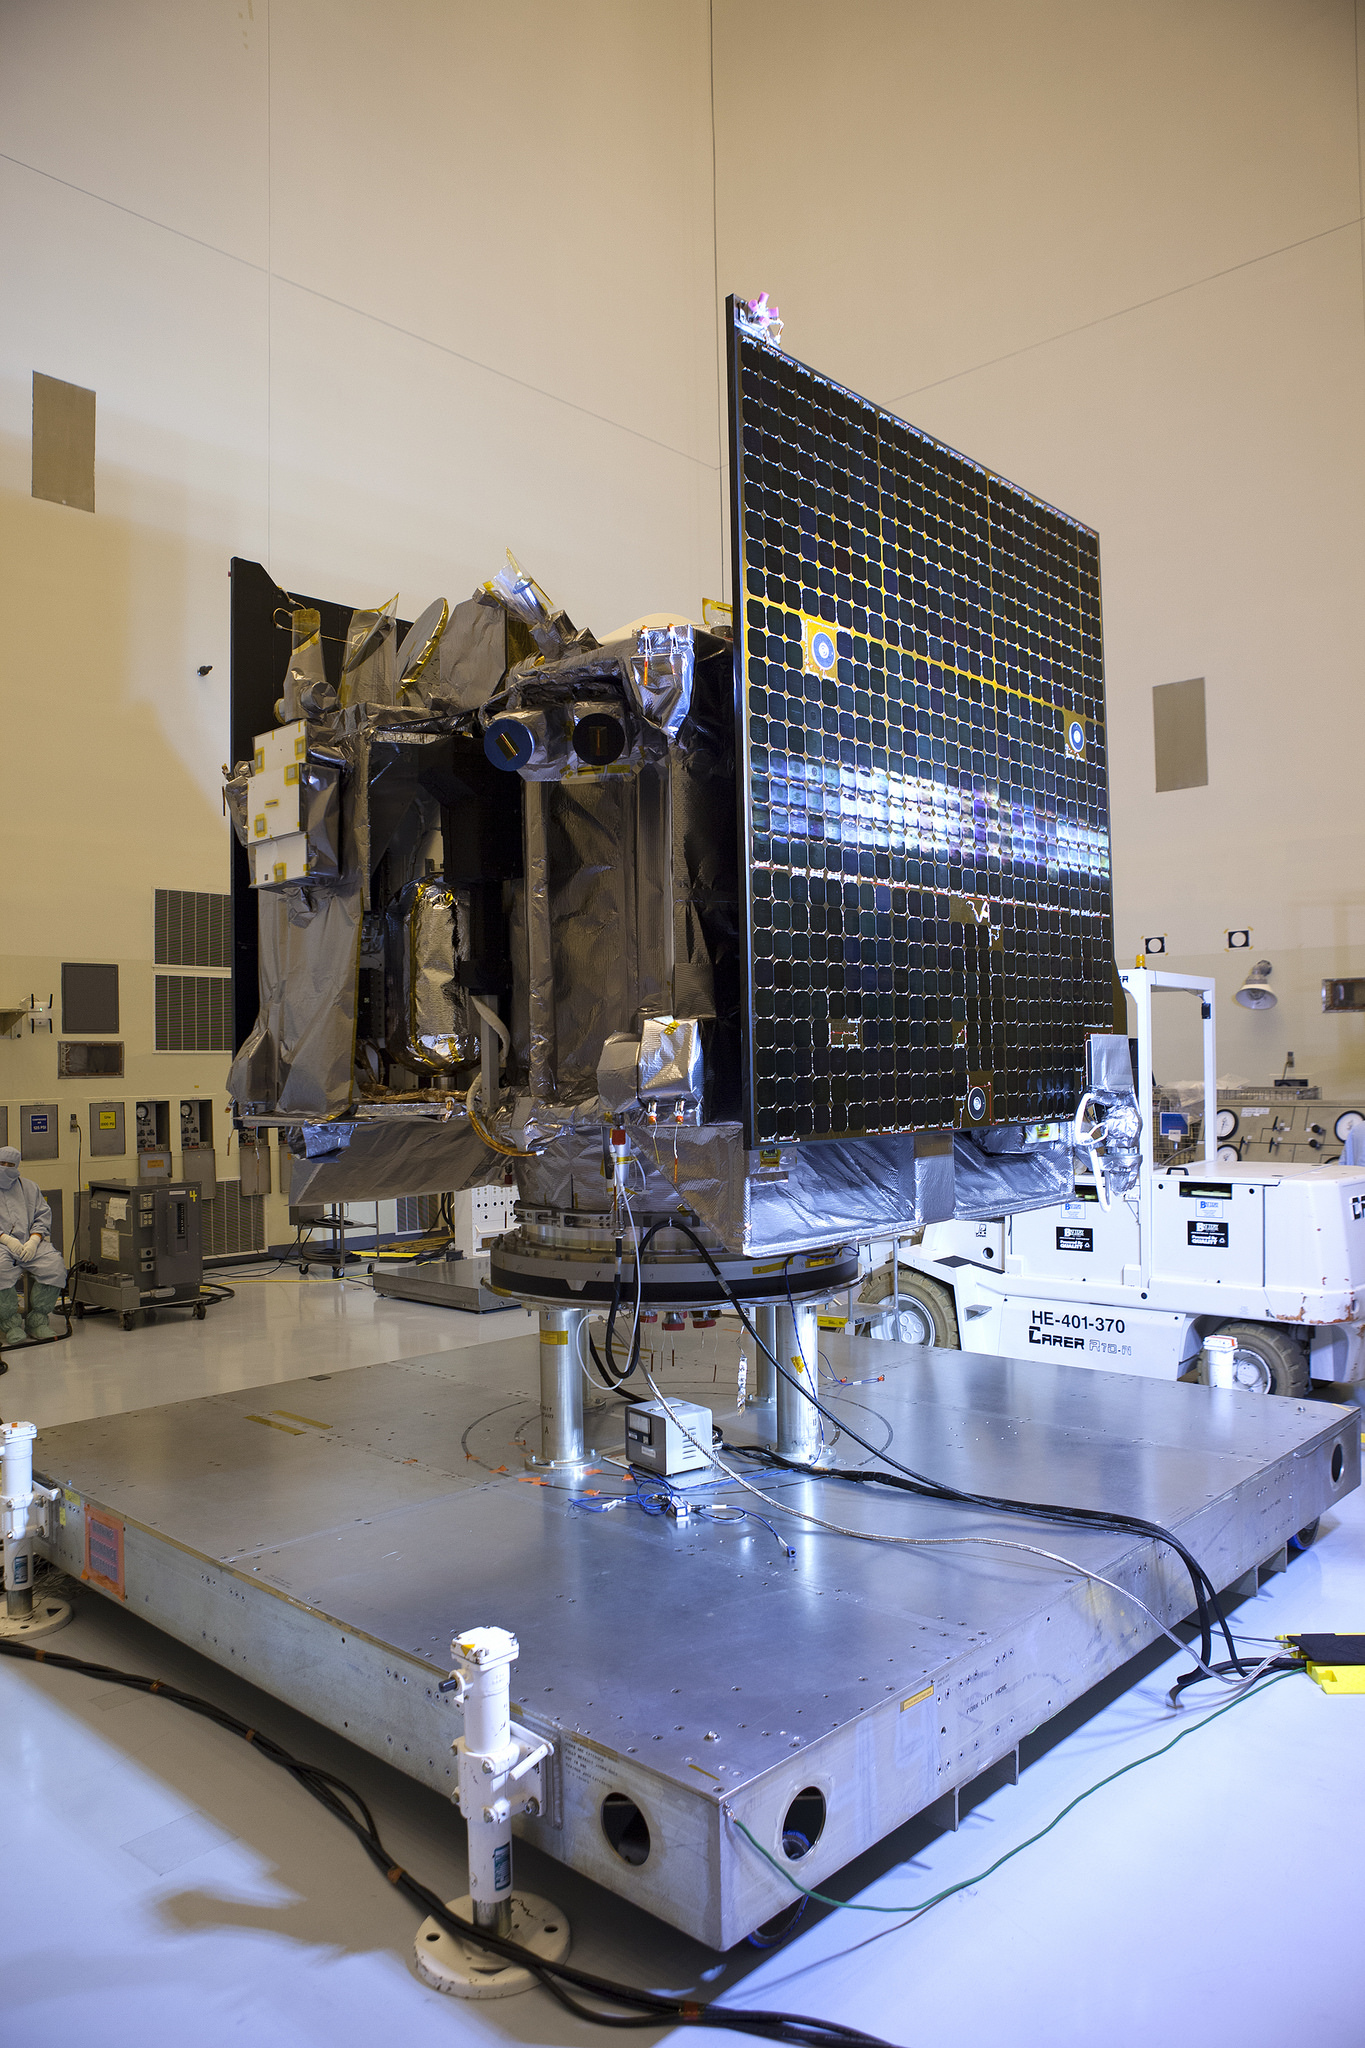 Inside the Payload Hazardous Servicing Facility, illumination testing is underway Aug. 5 on the power-producing solar arrays of 